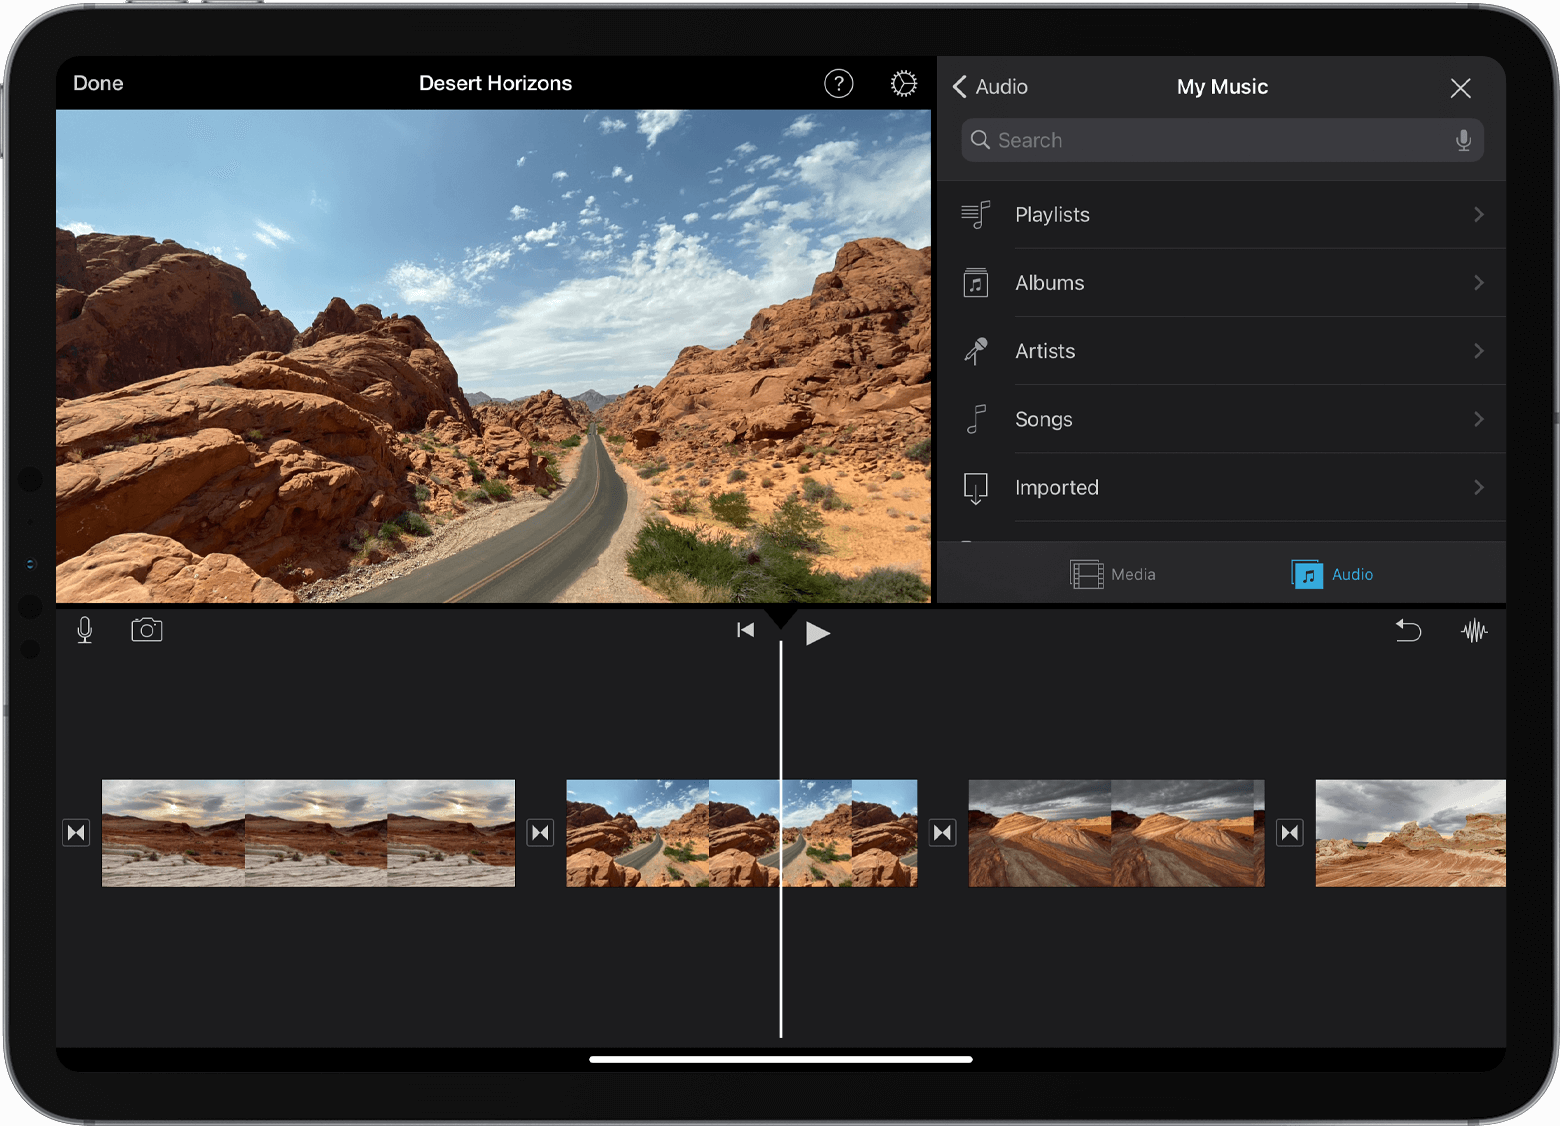 How To Add Music To Imovie On Mac